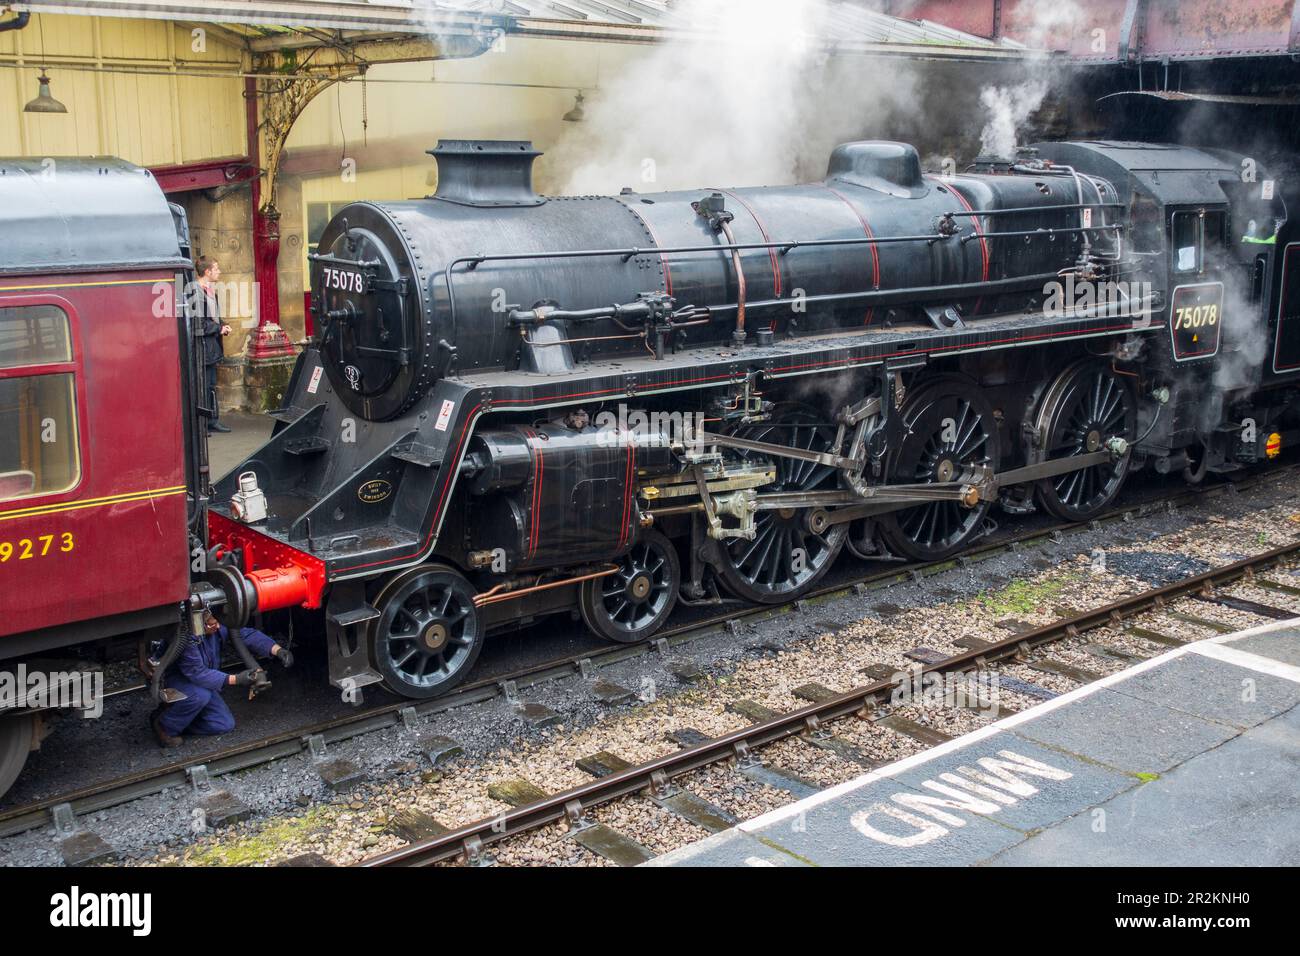 Restored Steam locomotive 75078 hitching up carriages on the Keighley & Worth Valley Railway at Keighley Station in West Yorkshire, England, UK Stock Photo